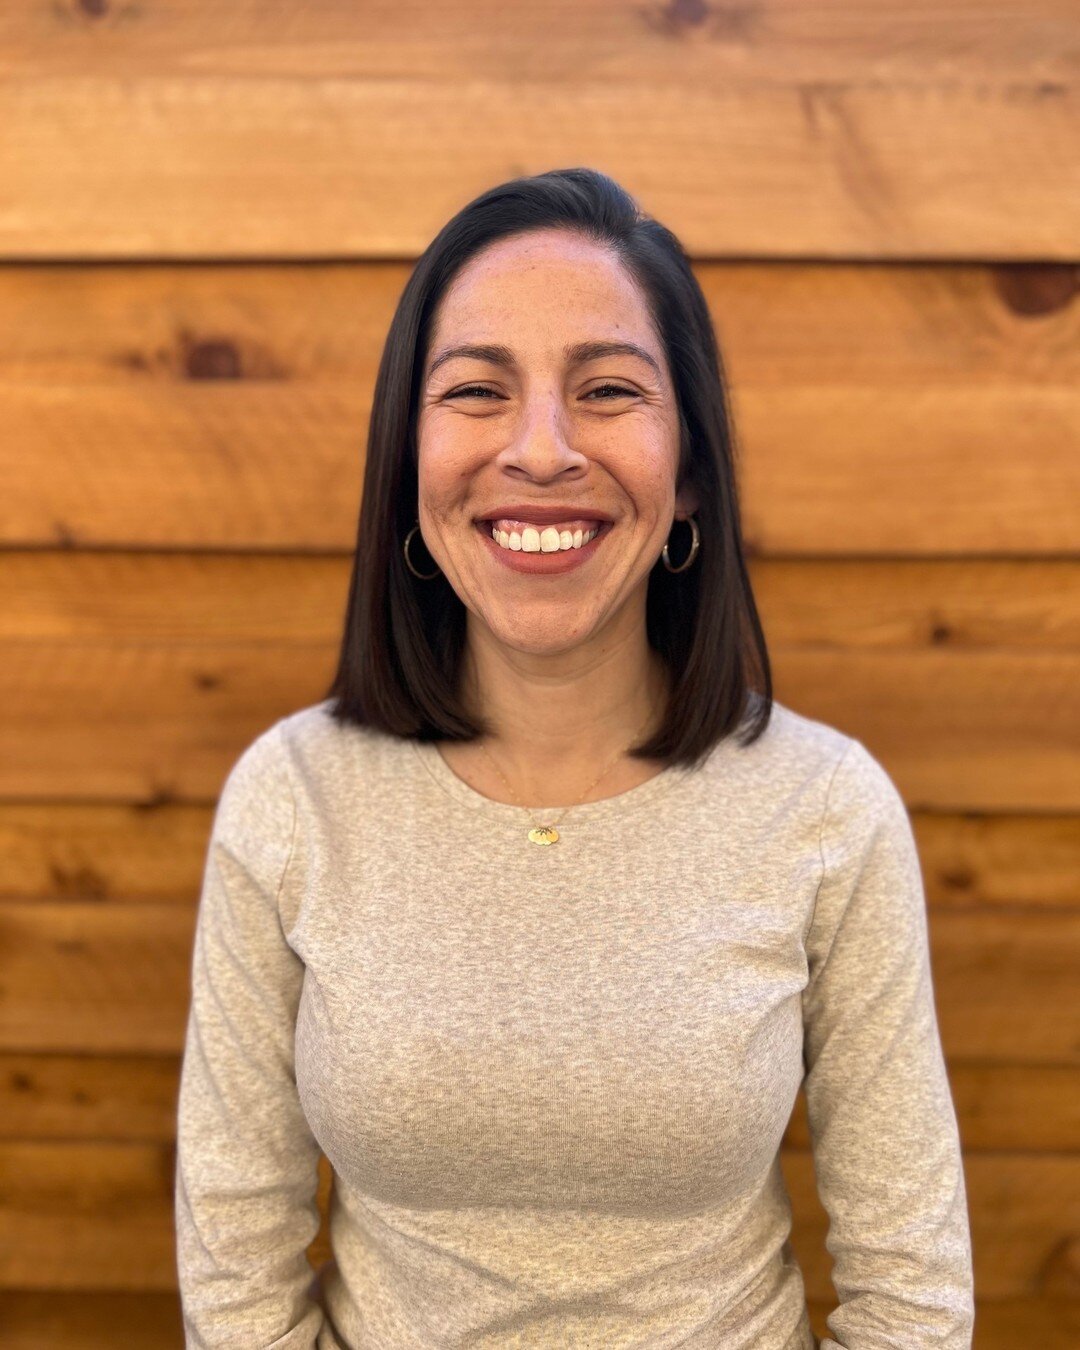 Today's staff highlight is our Director of Youth and Community Programs, Mavel Tortoledo. Mavel facilitates both the Community Learning Centers at The Village and The Lighthouse and our newest program, The Foundation House. Mavel launched the Foundat